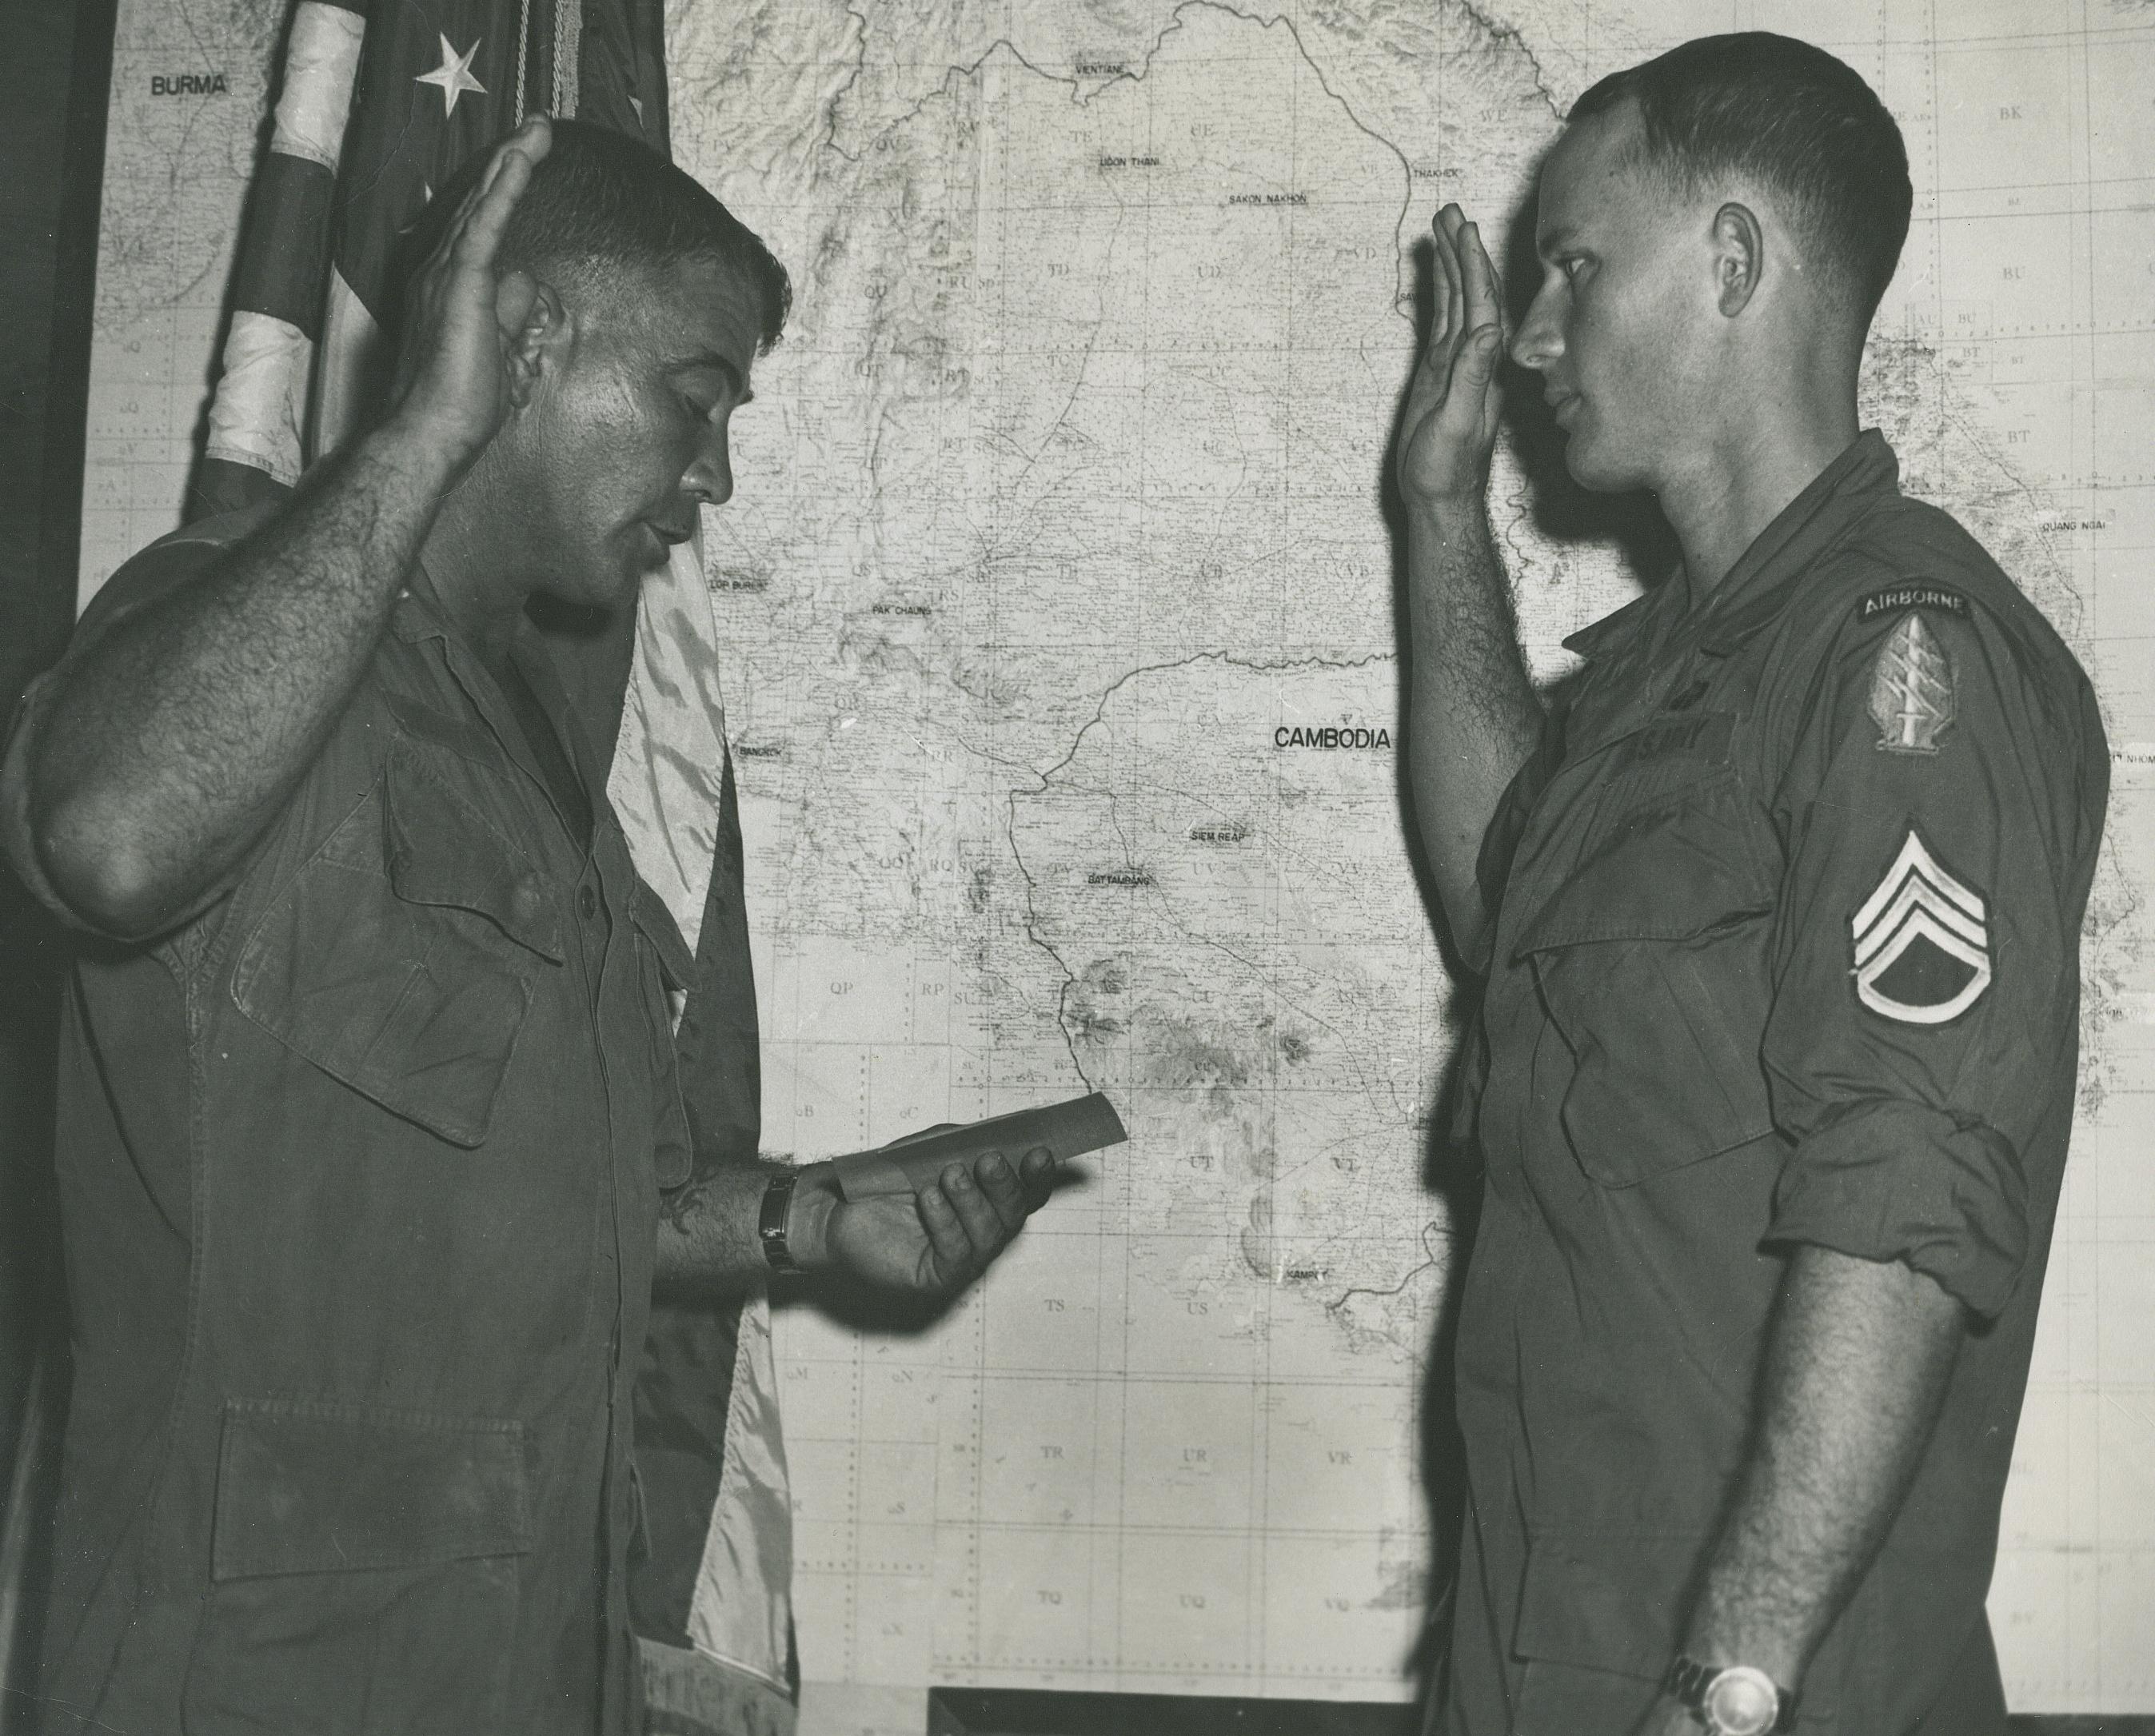 A-432 Team CPT R. Greenwood re- enlists SSG L Holmes at Company D, 1st SFGA SFOB in July 67